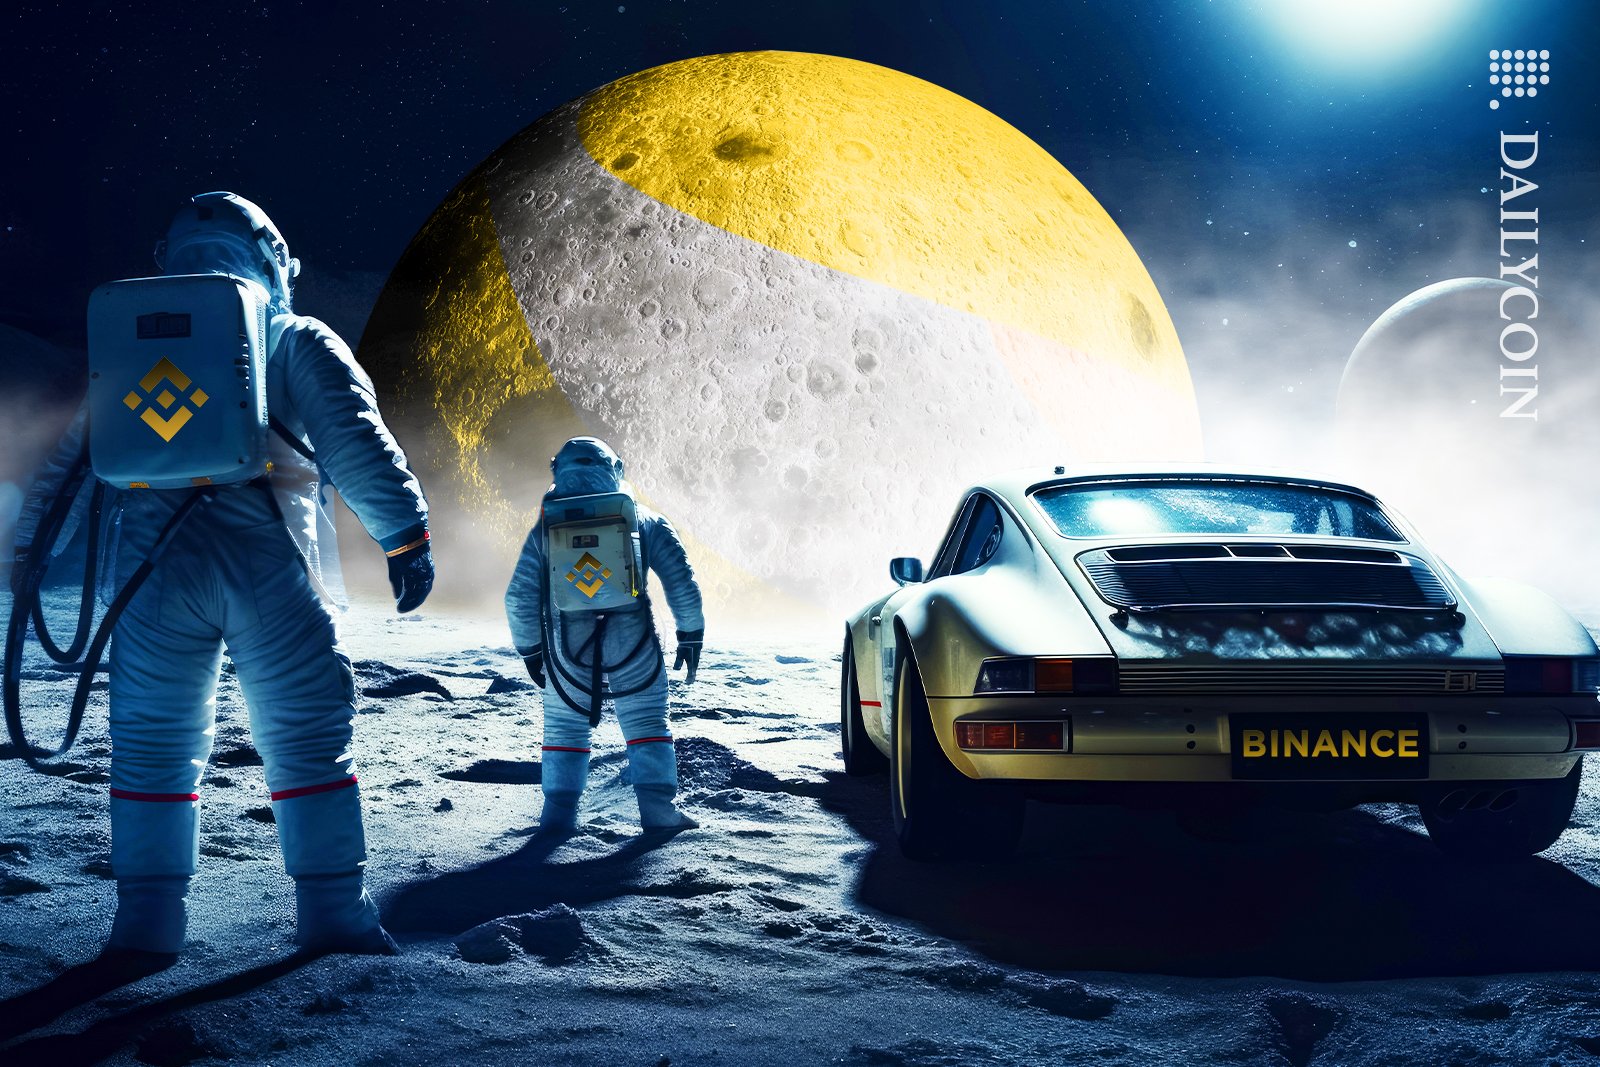 Binance astronauts arriving at Terra Luna moon together with a yellow Binance car.